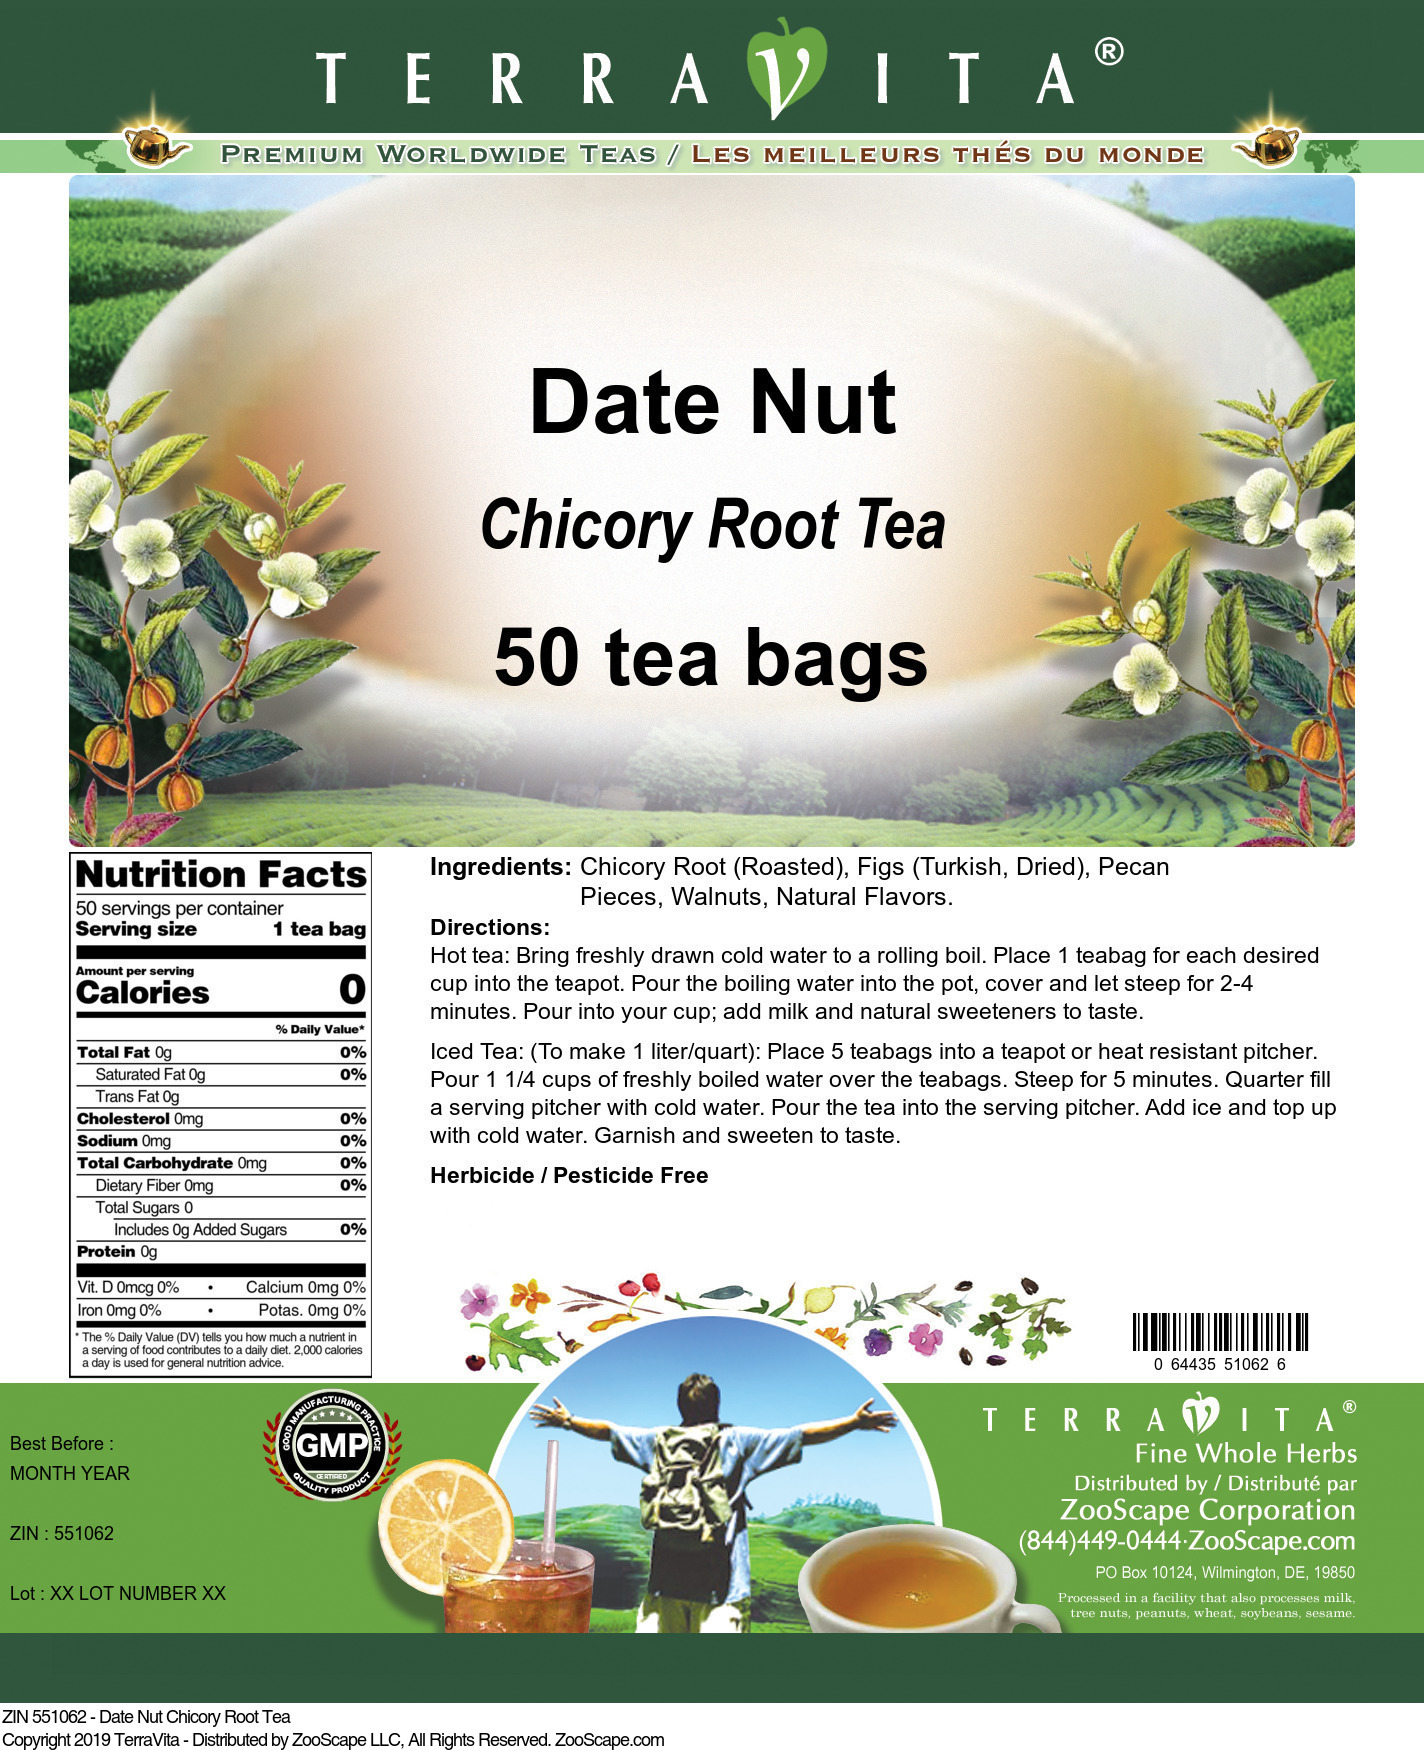 Date Nut Chicory Root Tea - Label